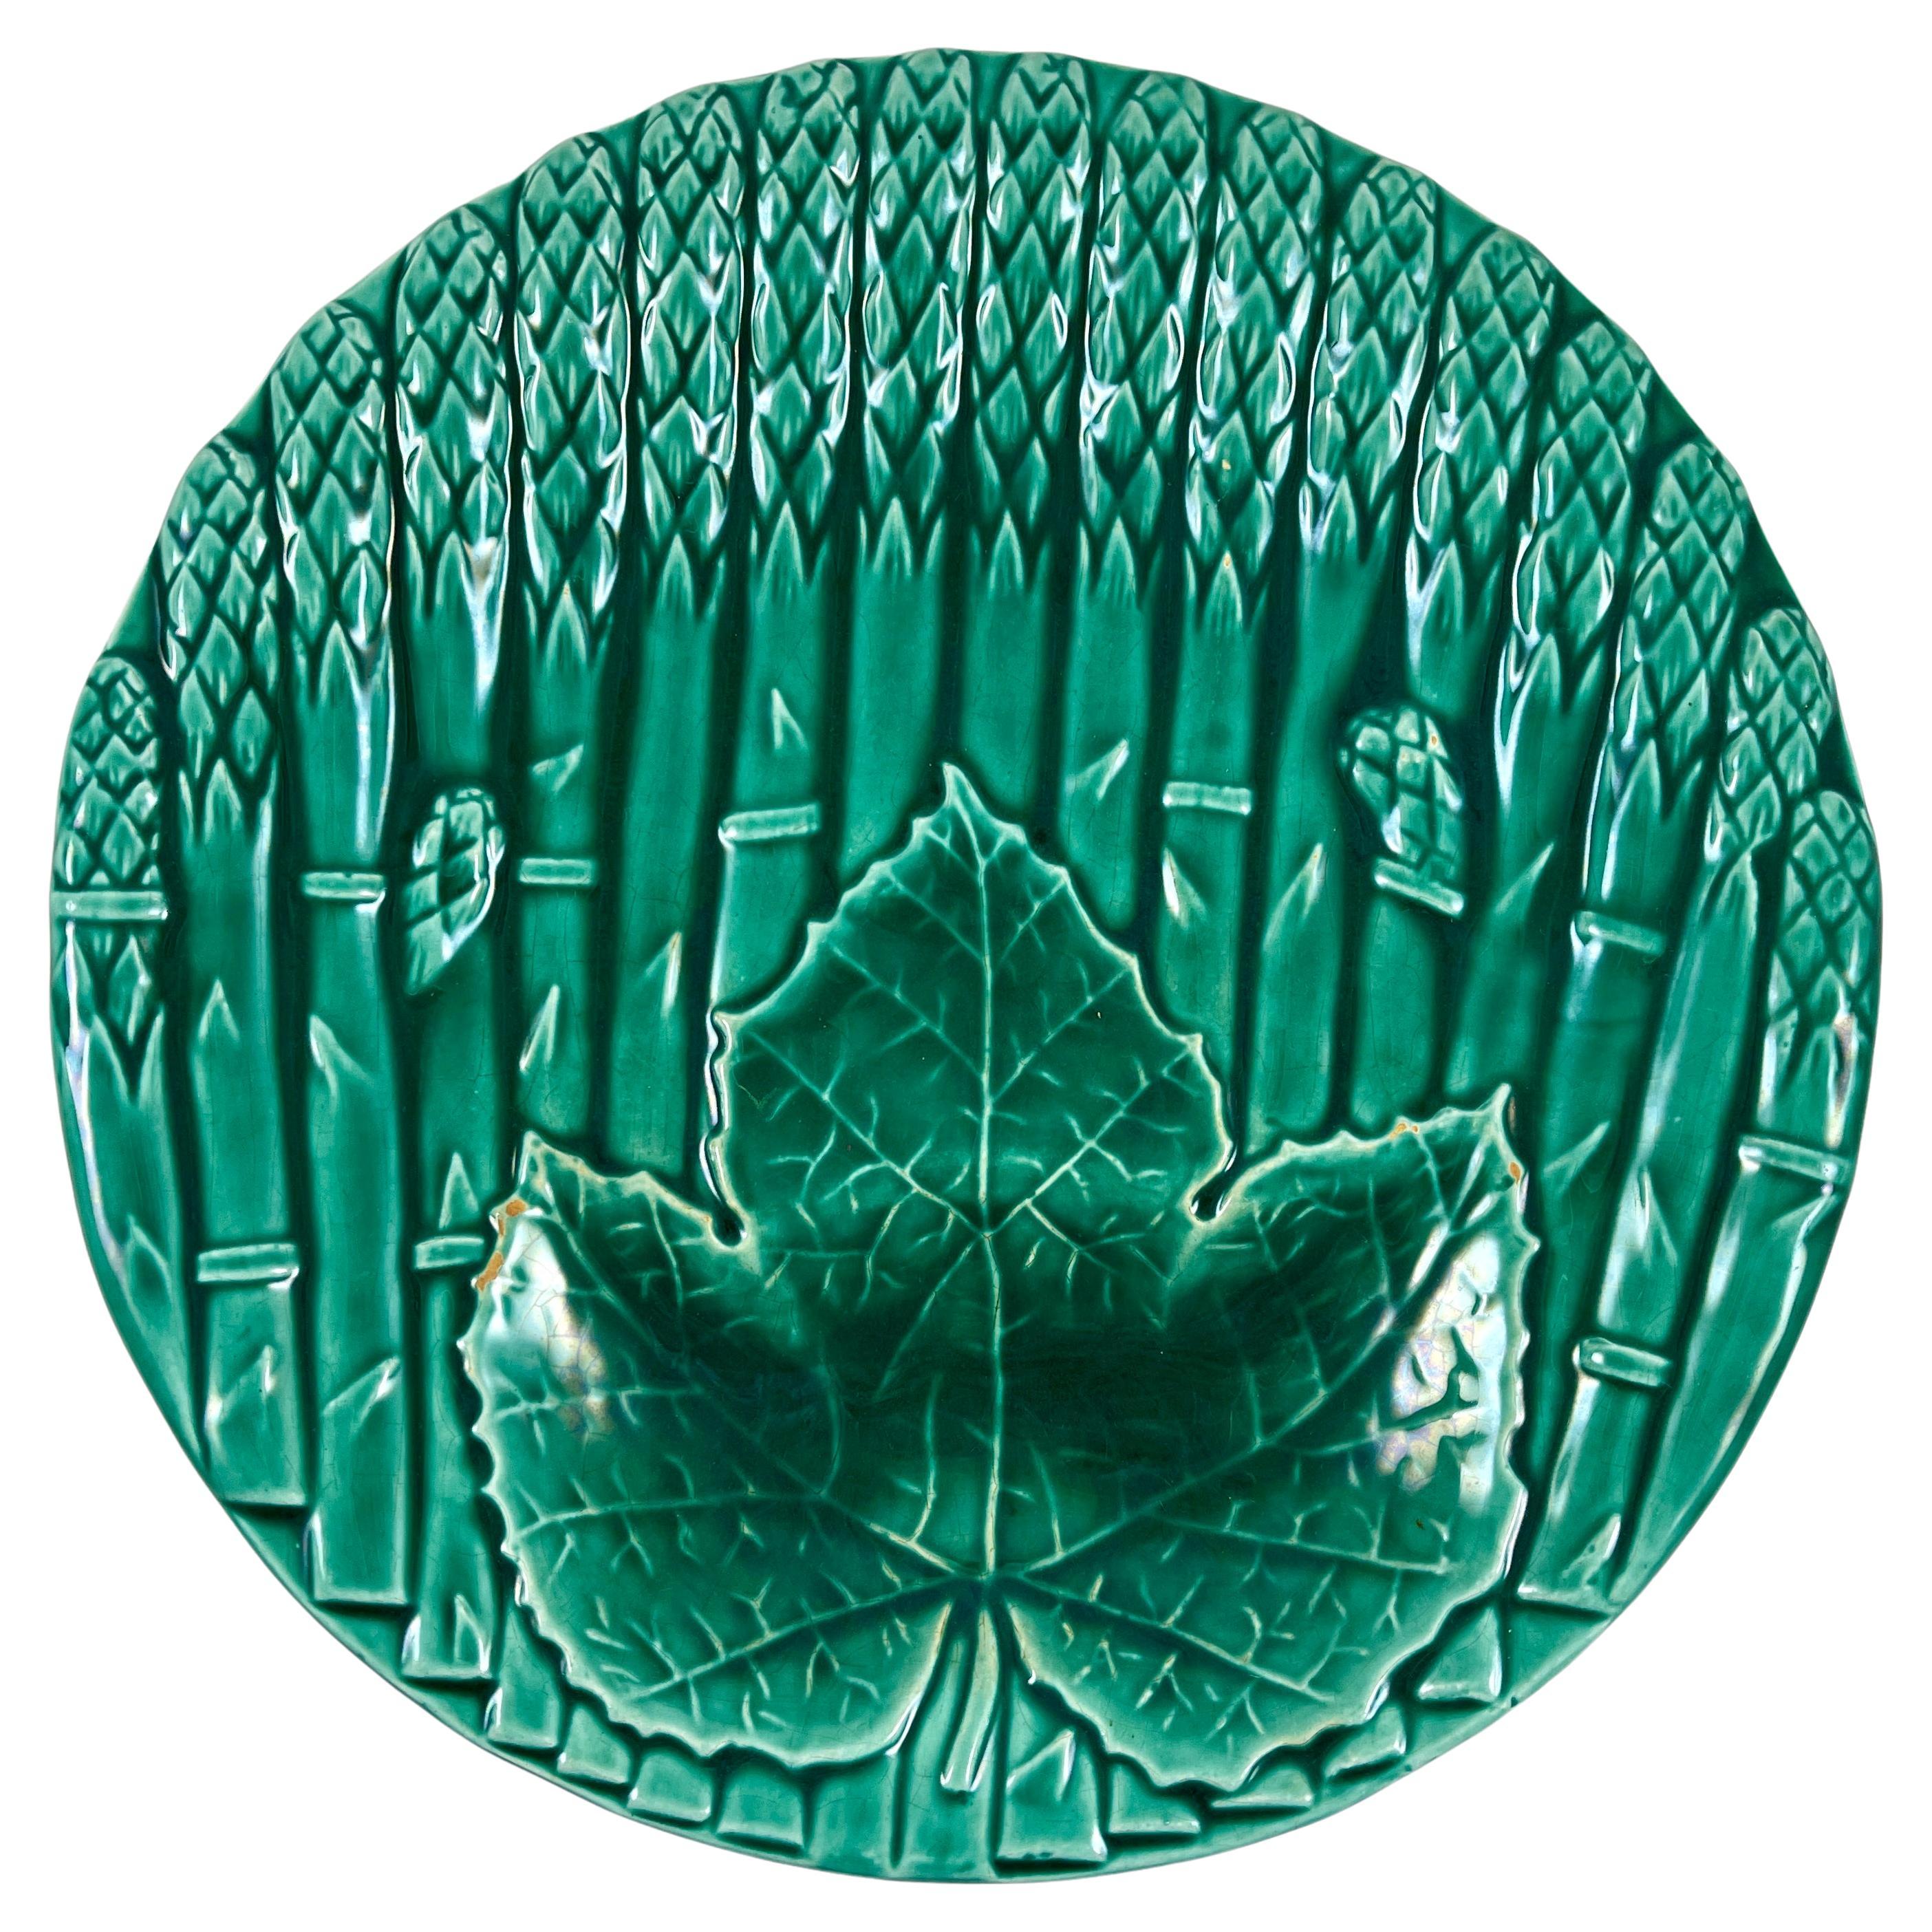 Saint Amand et Hamage Green French Faïence Asparagus Plate, 1930s For Sale